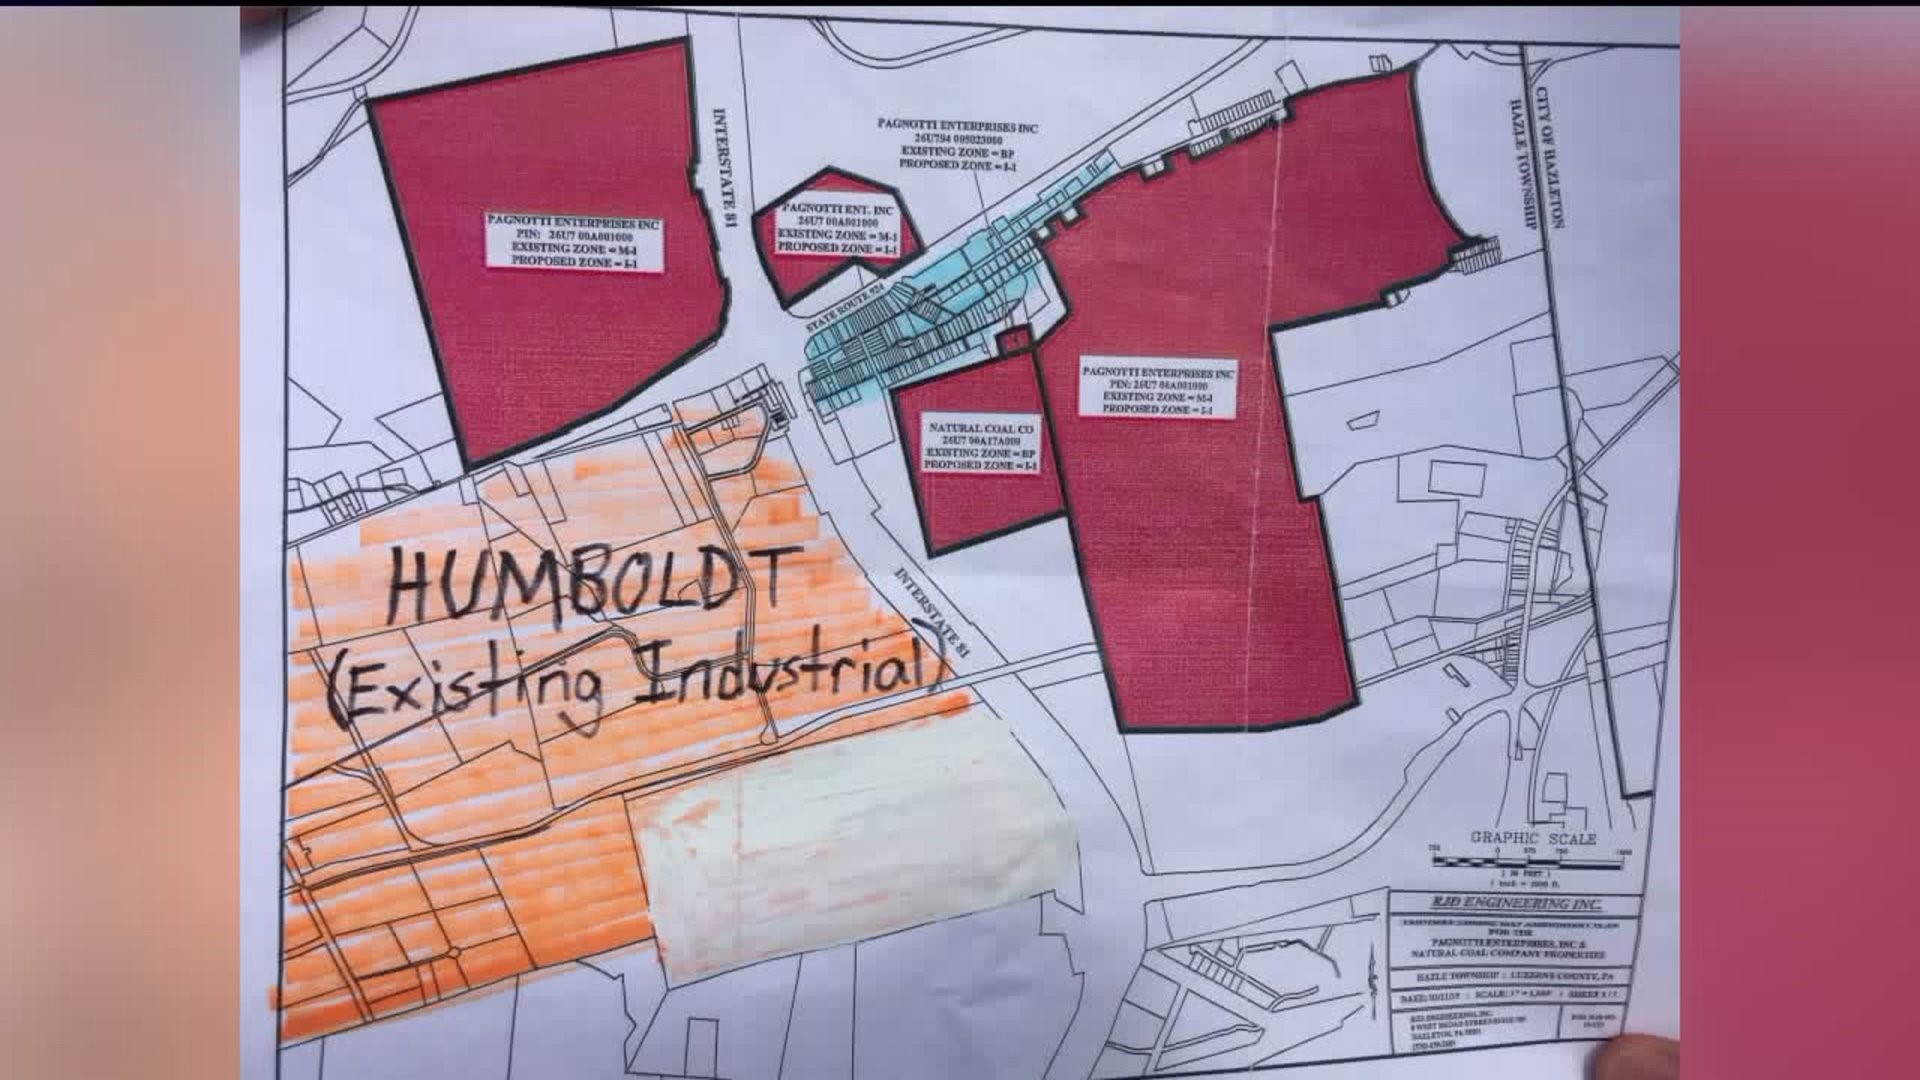 Concern over Possible Industrial Development in Hazle Township